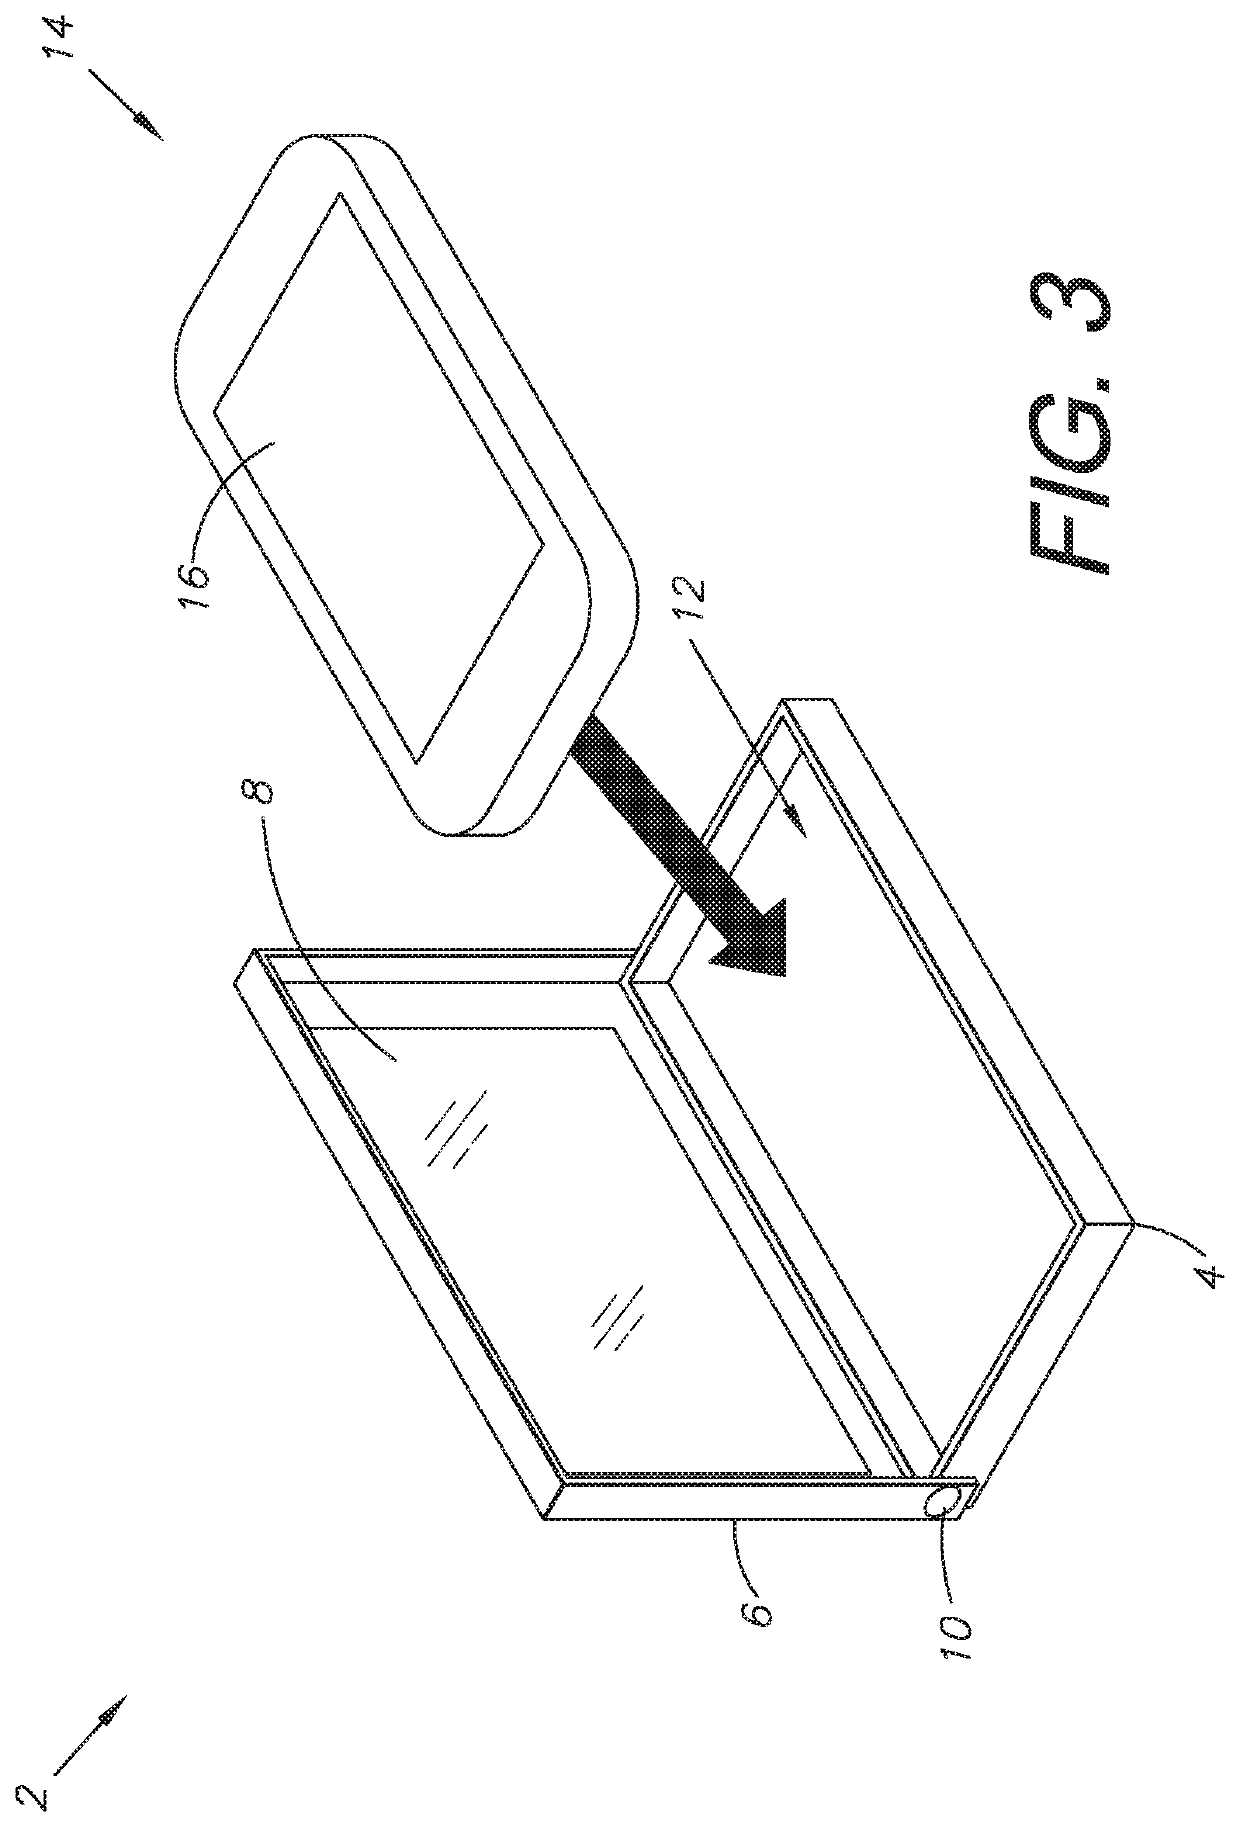 Adjustable phone lens accessory and method of use